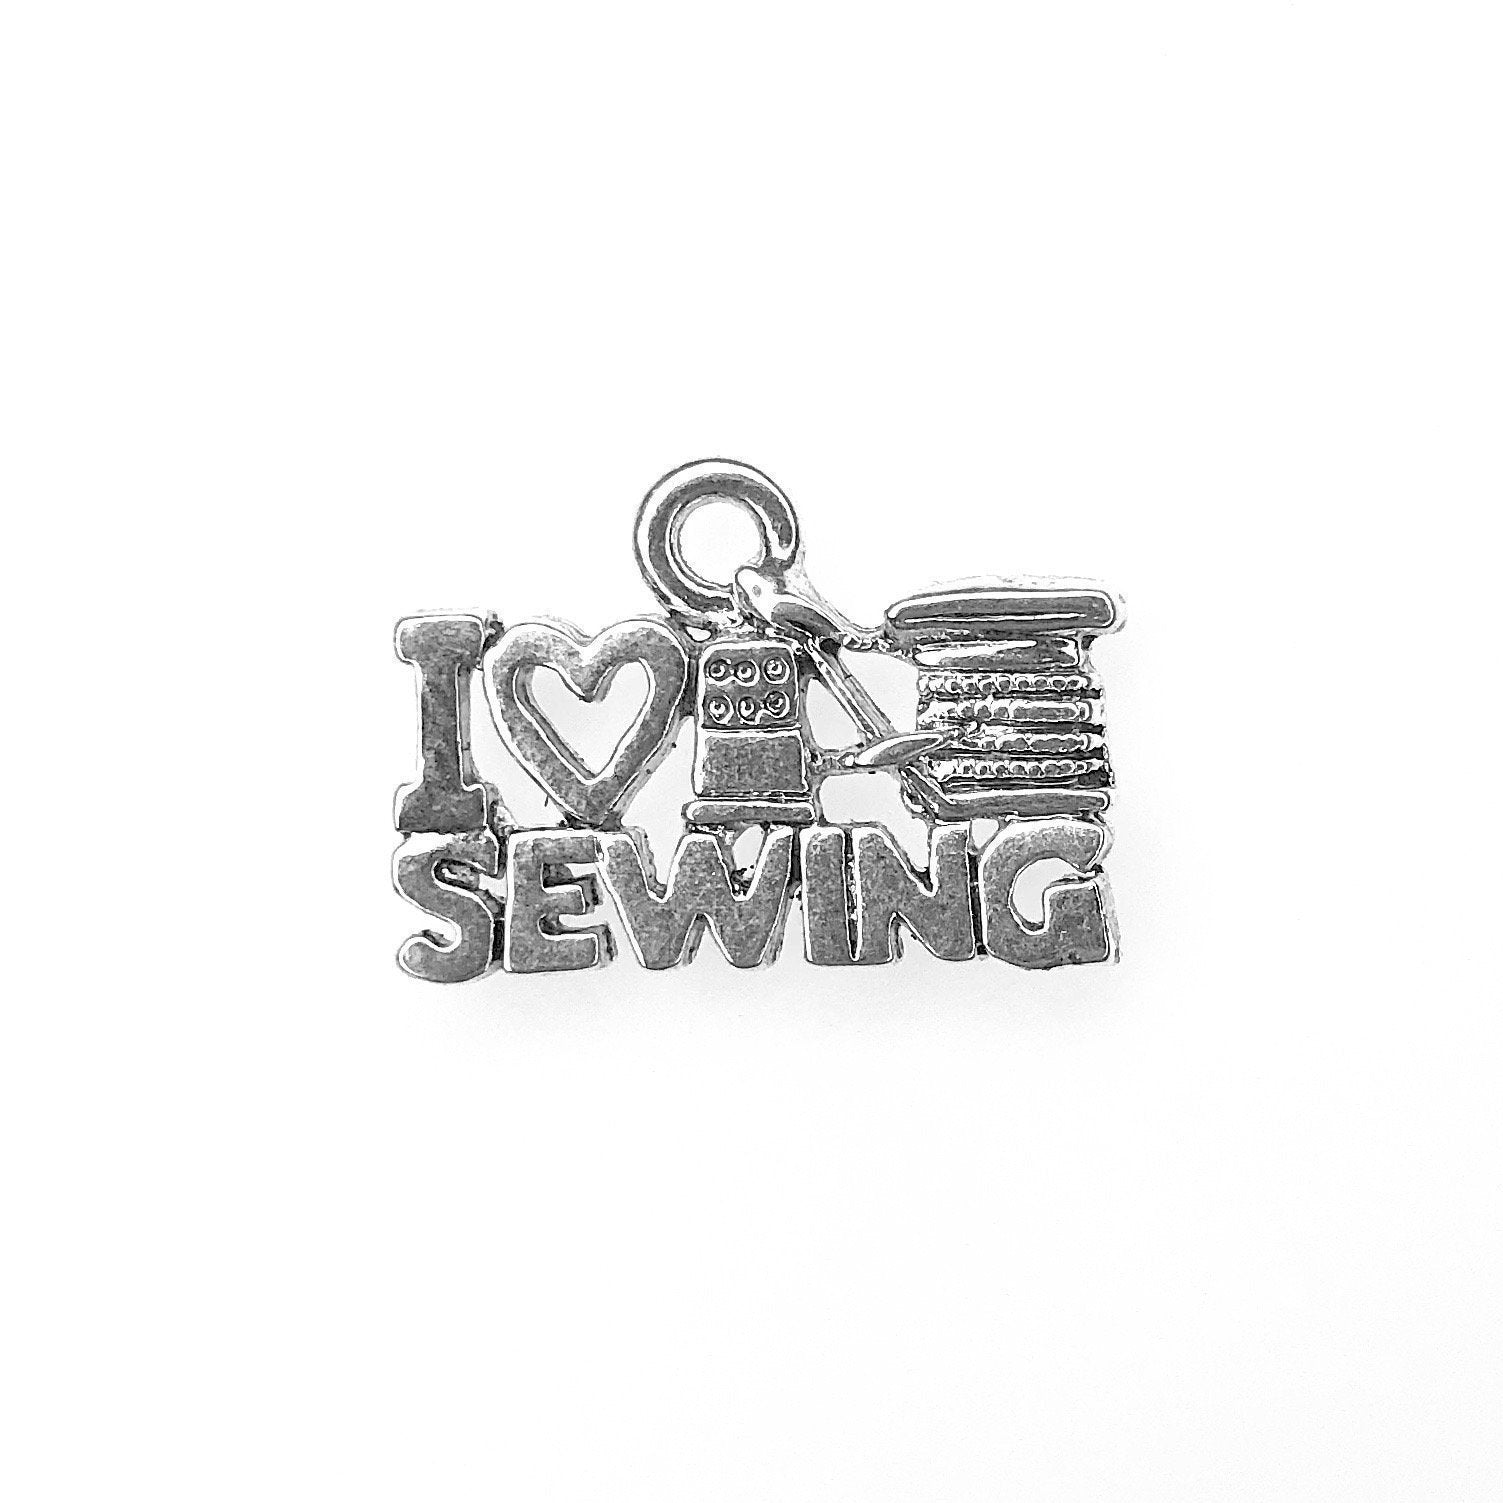 "I Love Sewing" Word Pewter Charm-Watchus